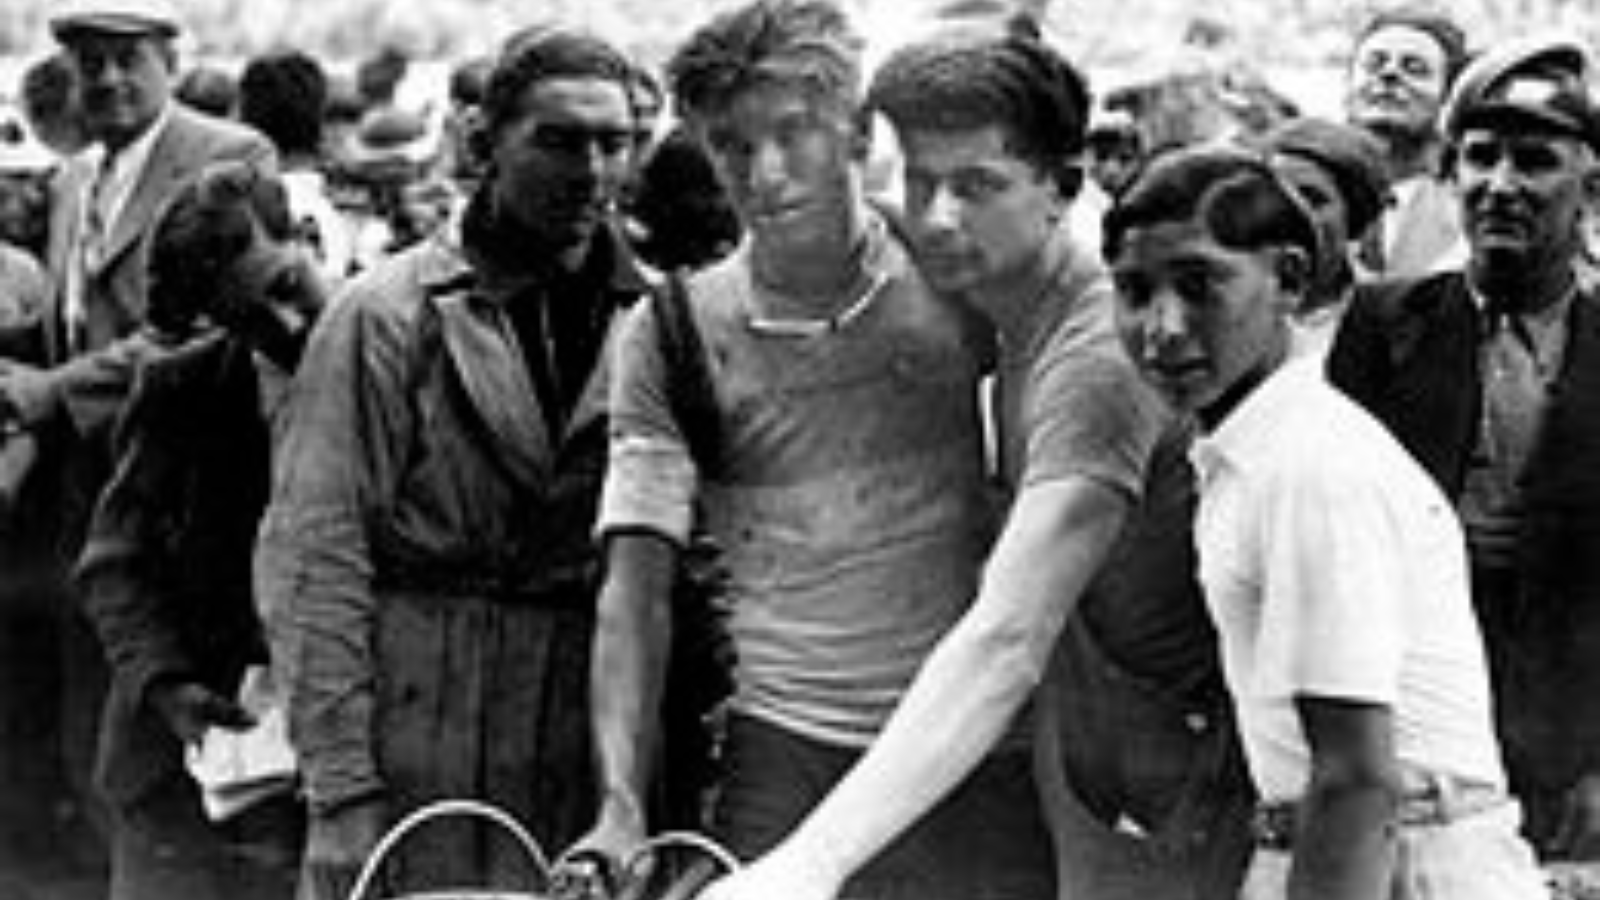 Theo Middelkamp (1914-2005), the first Dutch cyclist to win a Tour de Frsnce stage posing with fans in 1936